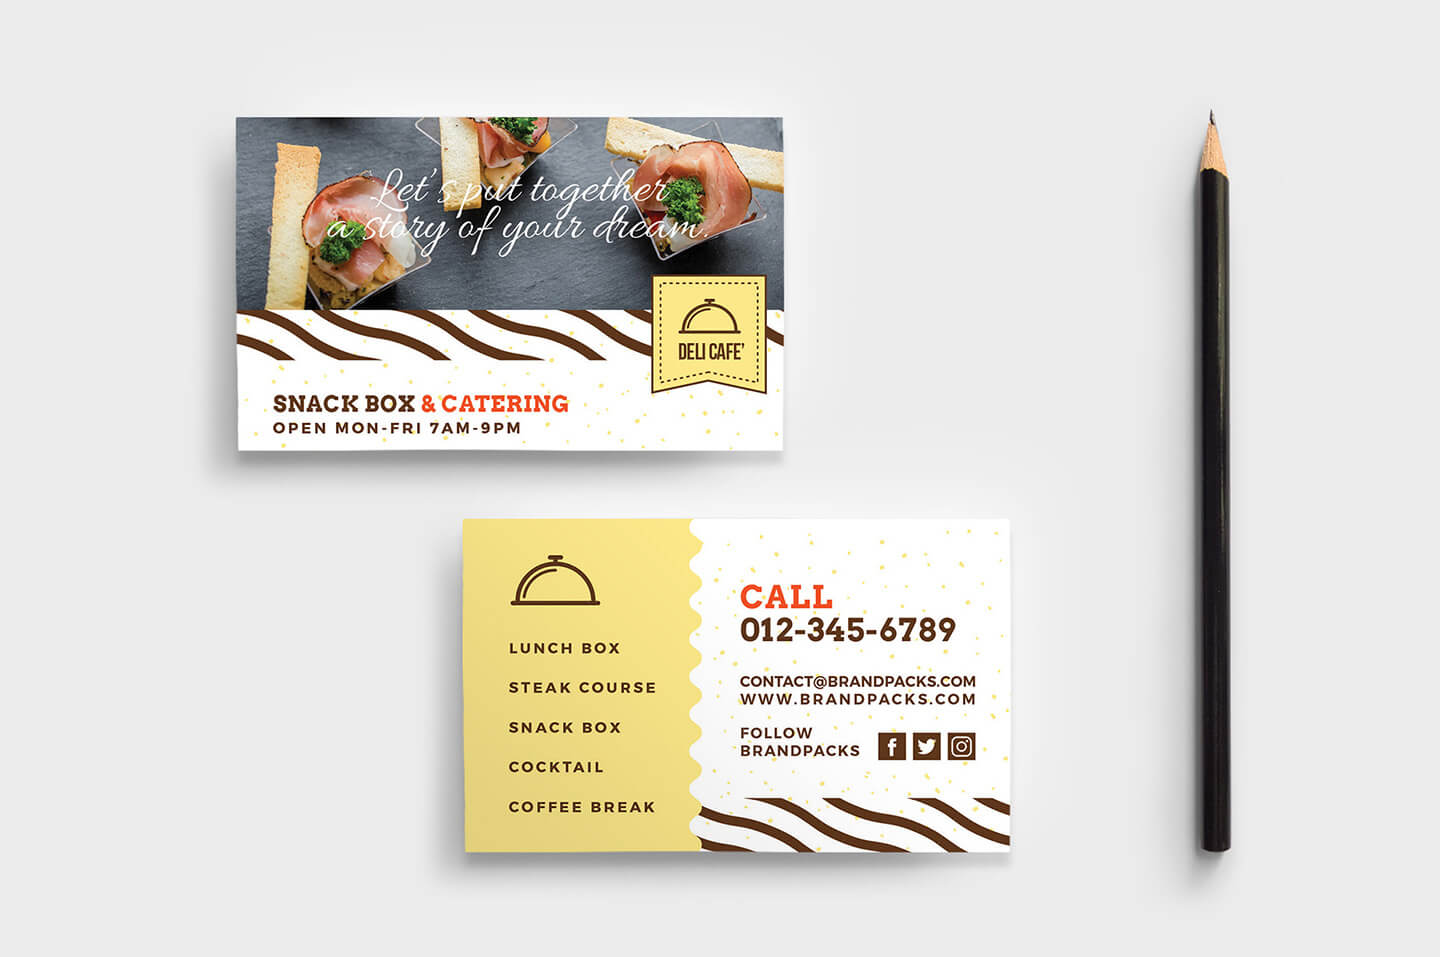 Catering Service Business Card Template – Psd, Ai & Vector For Social Security Card Template Psd